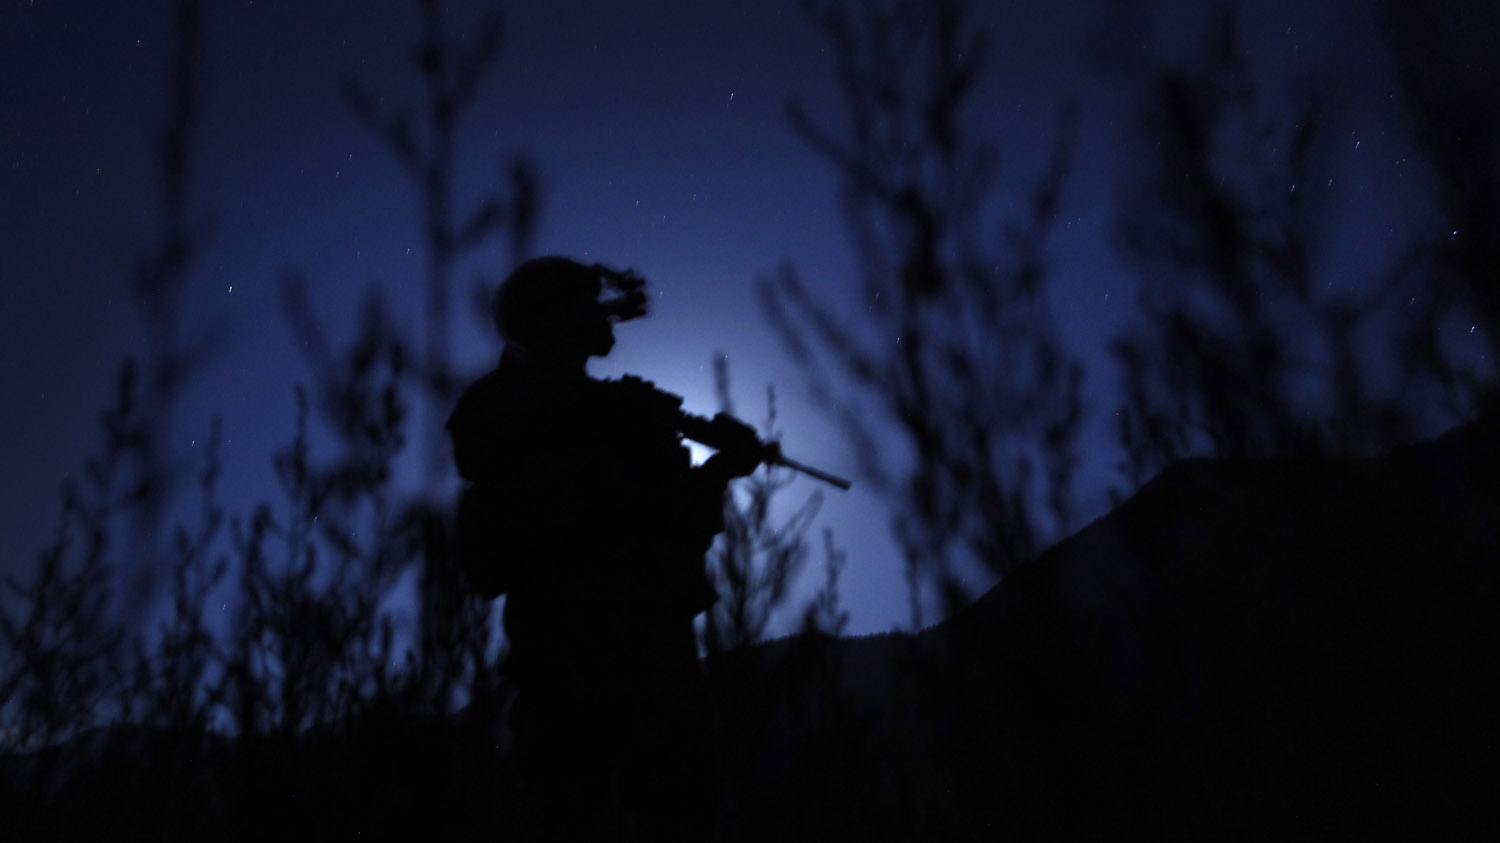 A soldier from the U.S. Army's Alpha Company, 1-12 Infantry, 4th Brigade, 4th Infantry Division, guards an LZ at night at COP Pirtle-King in Afghanistan